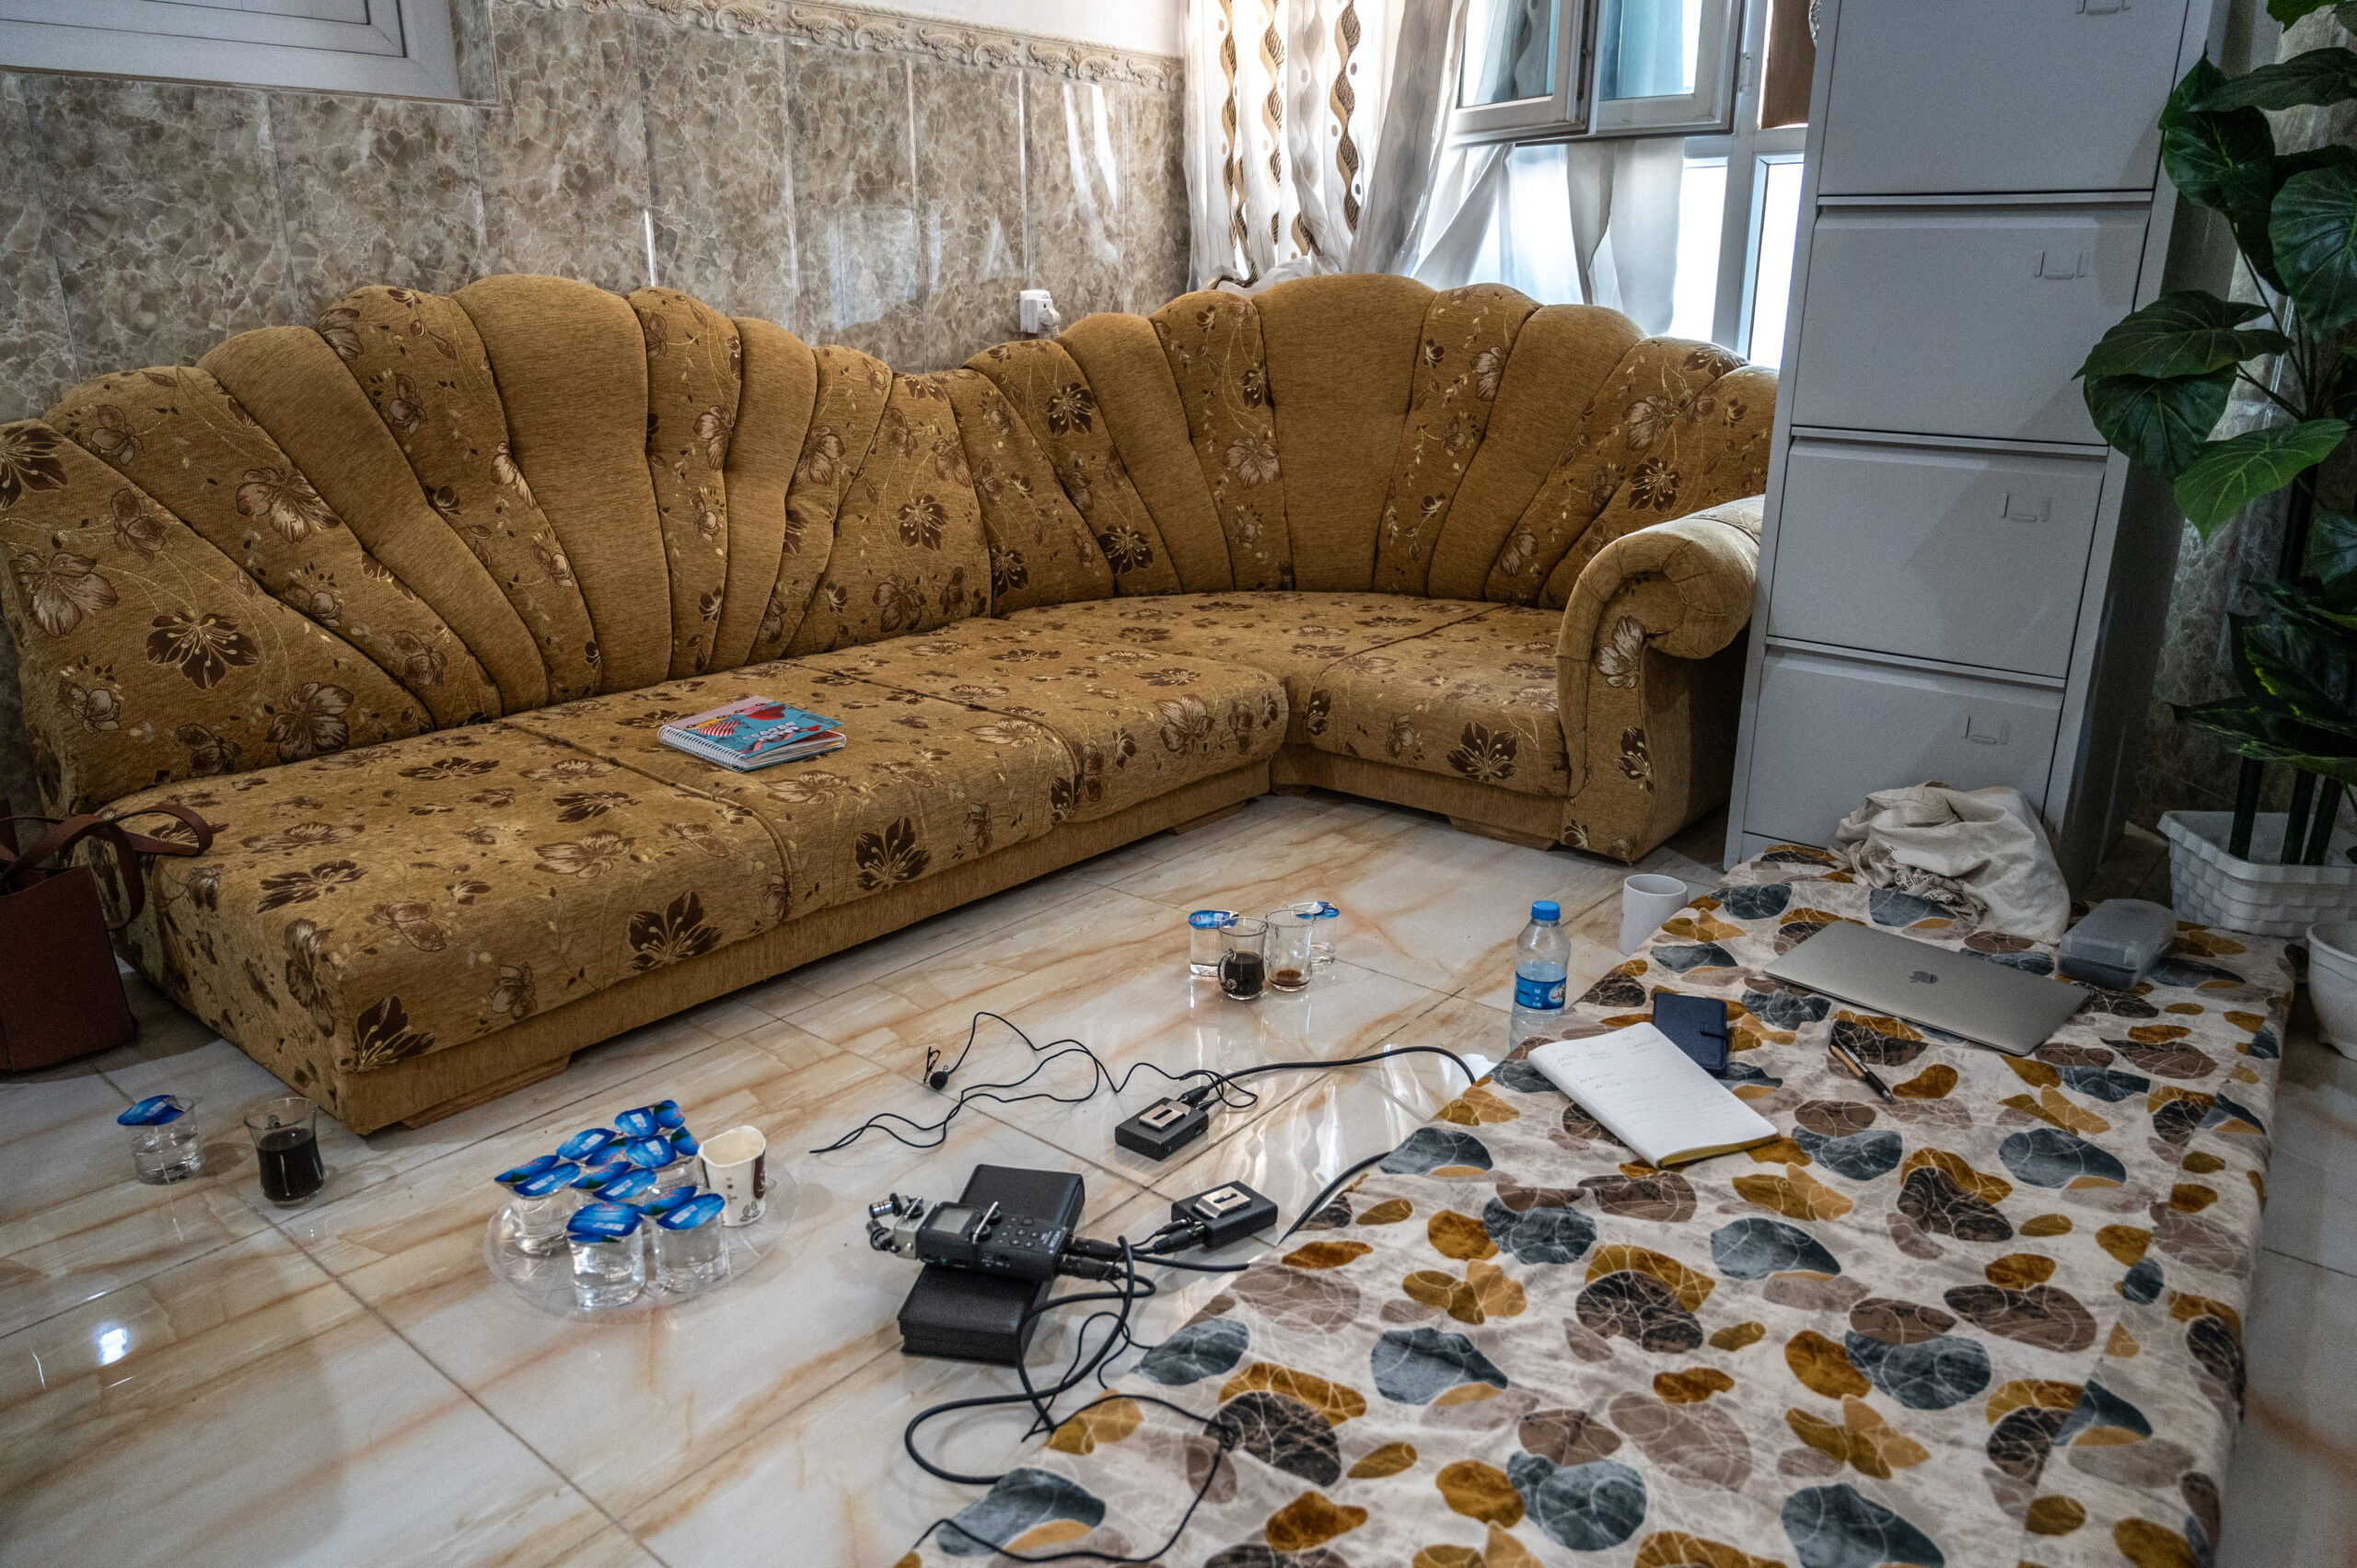 A room in a house in the Khanke refugee camp, Northern Iraq, where Dr Becky Jinks conducted interviews with survivors of the Yezidi genocide